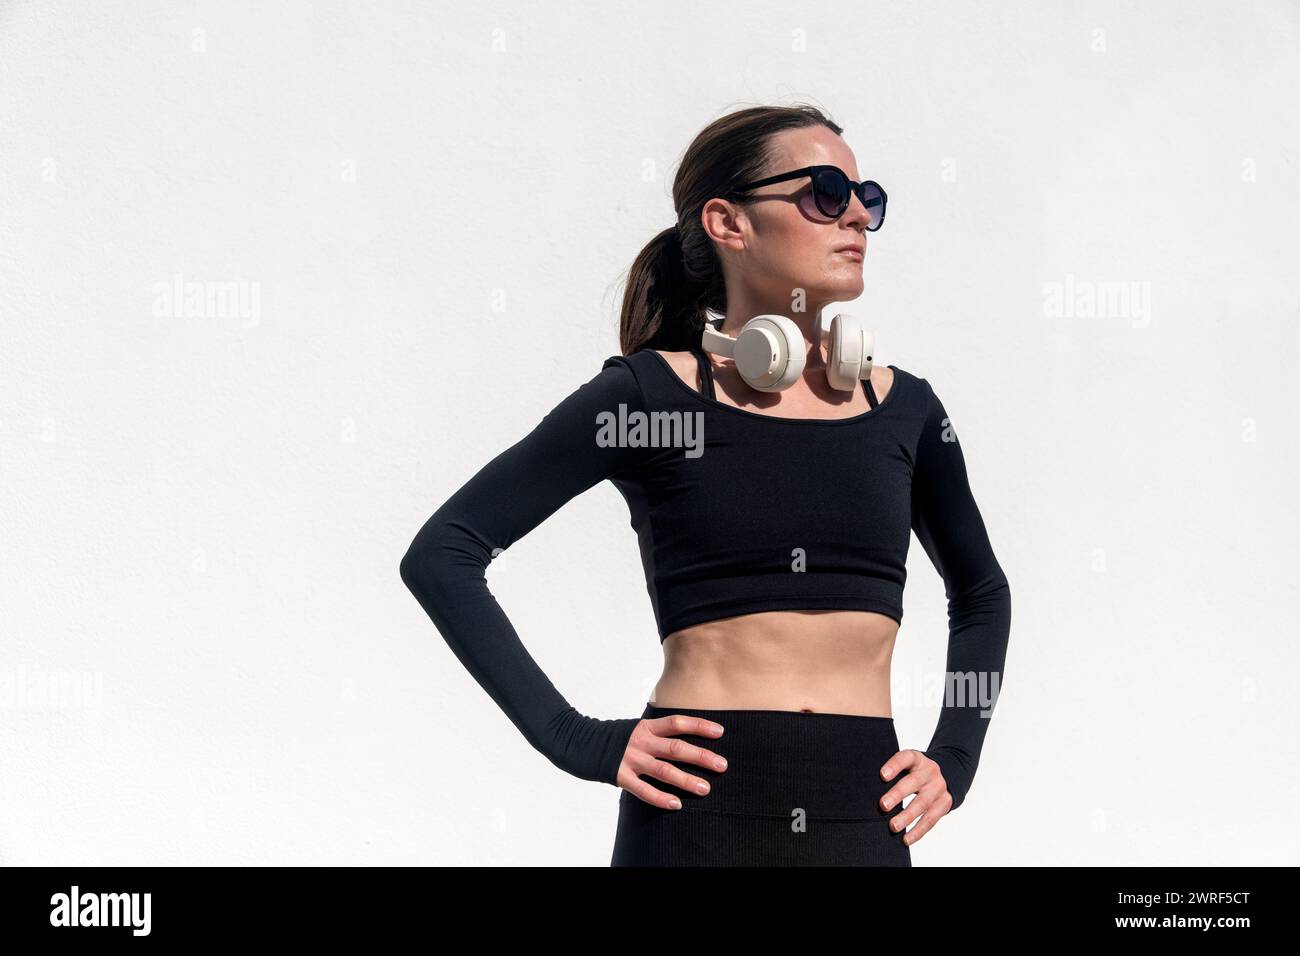 sporty woman with hands on her hips and headphones resting after exercise outdoors in the sun Stock Photo